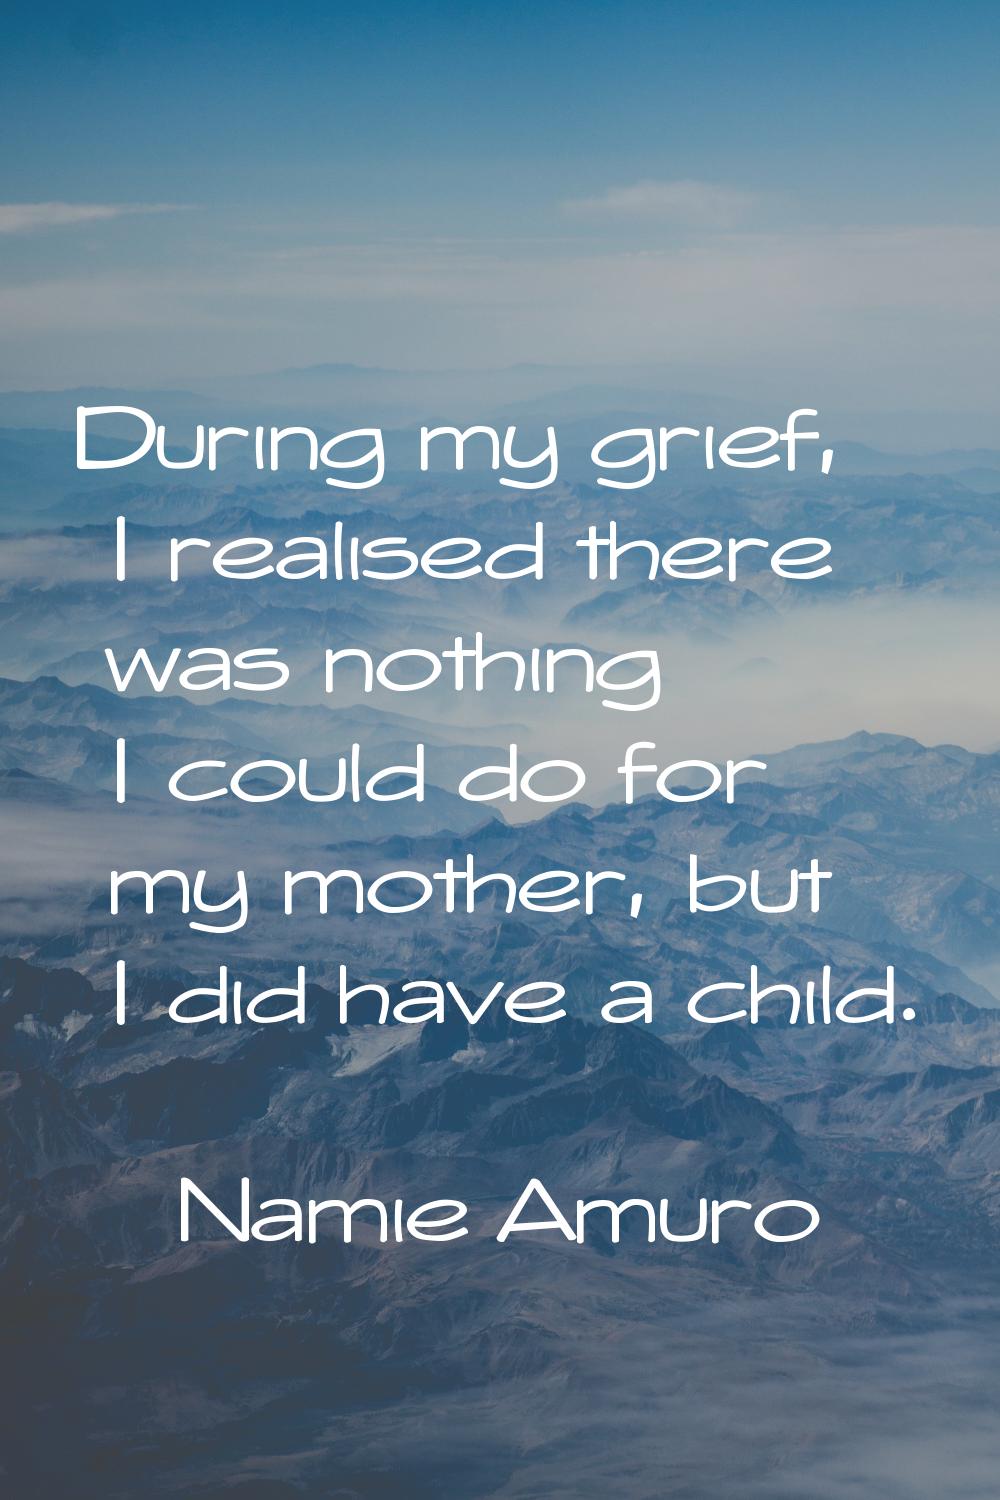 During my grief, I realised there was nothing I could do for my mother, but I did have a child.